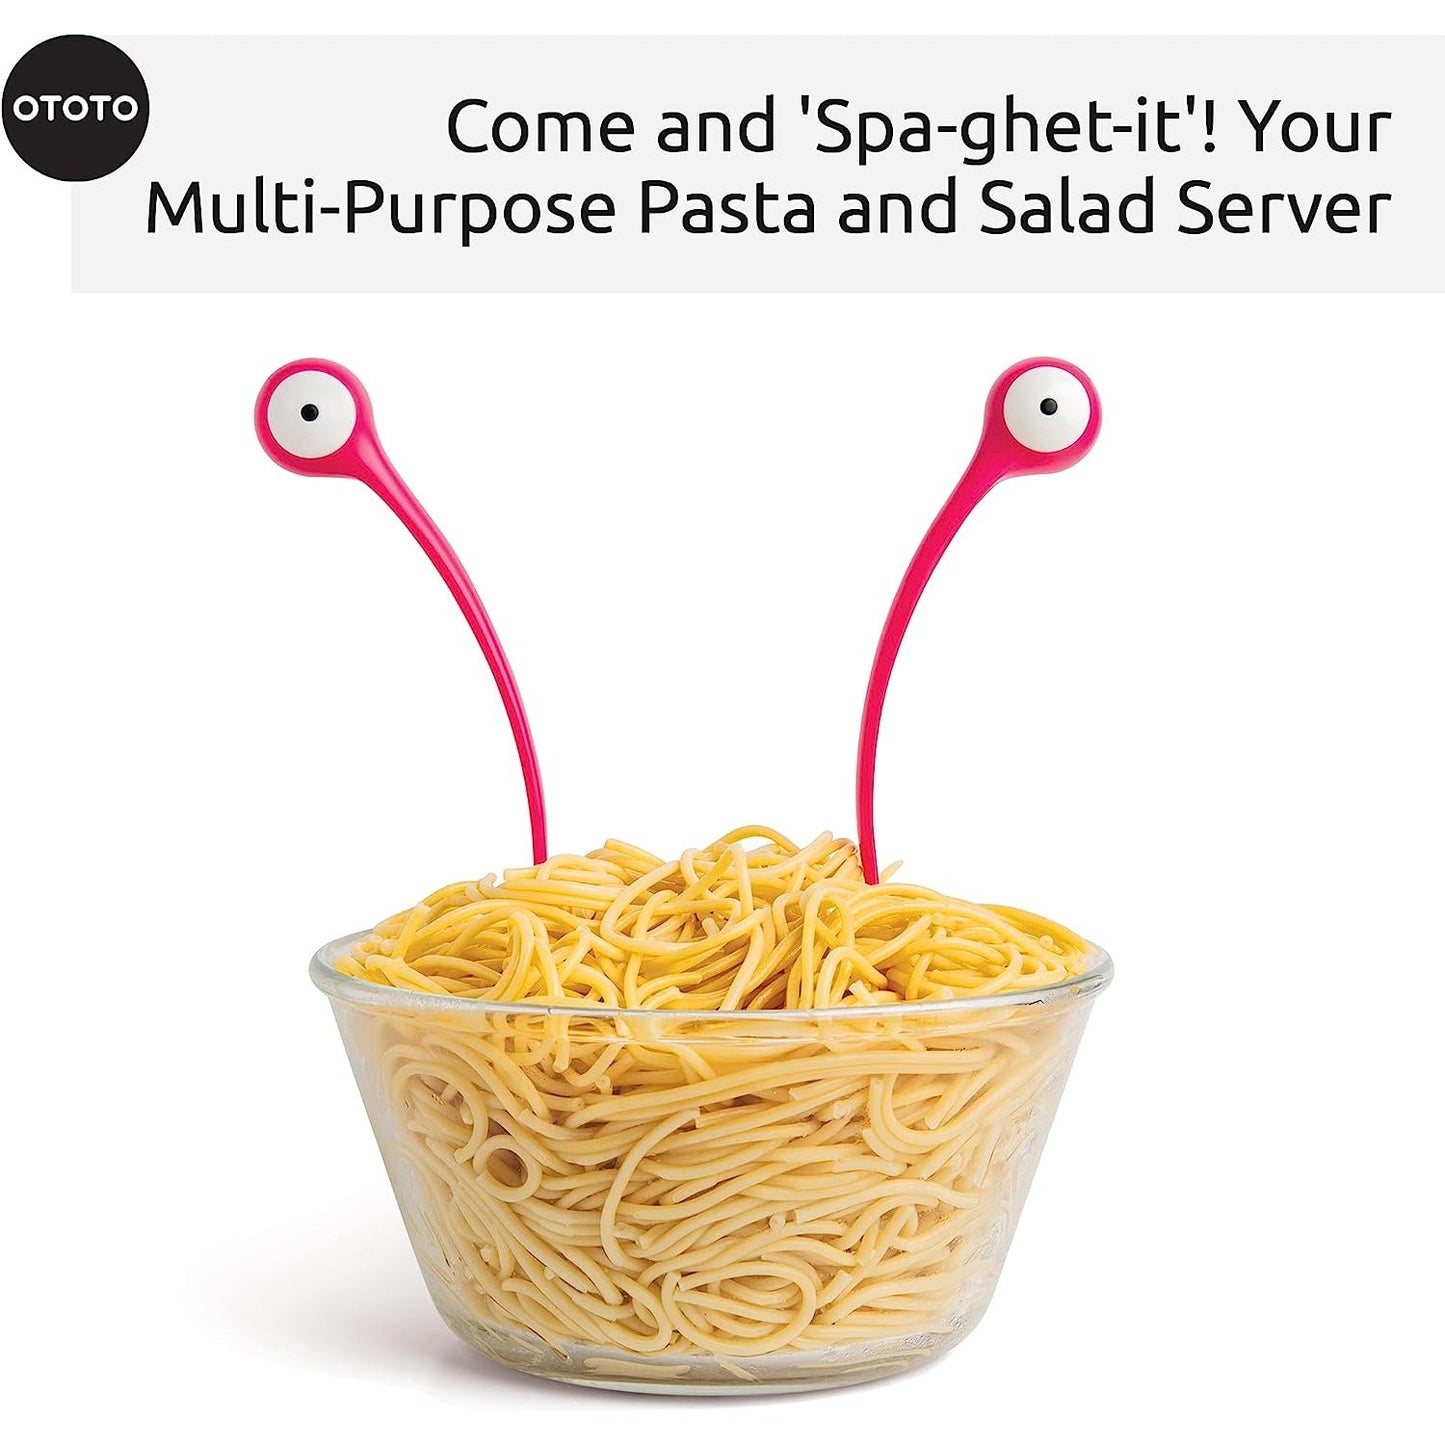 A pair of monster-looking salad and pasta scoopers are resting in a bowl of pasta.